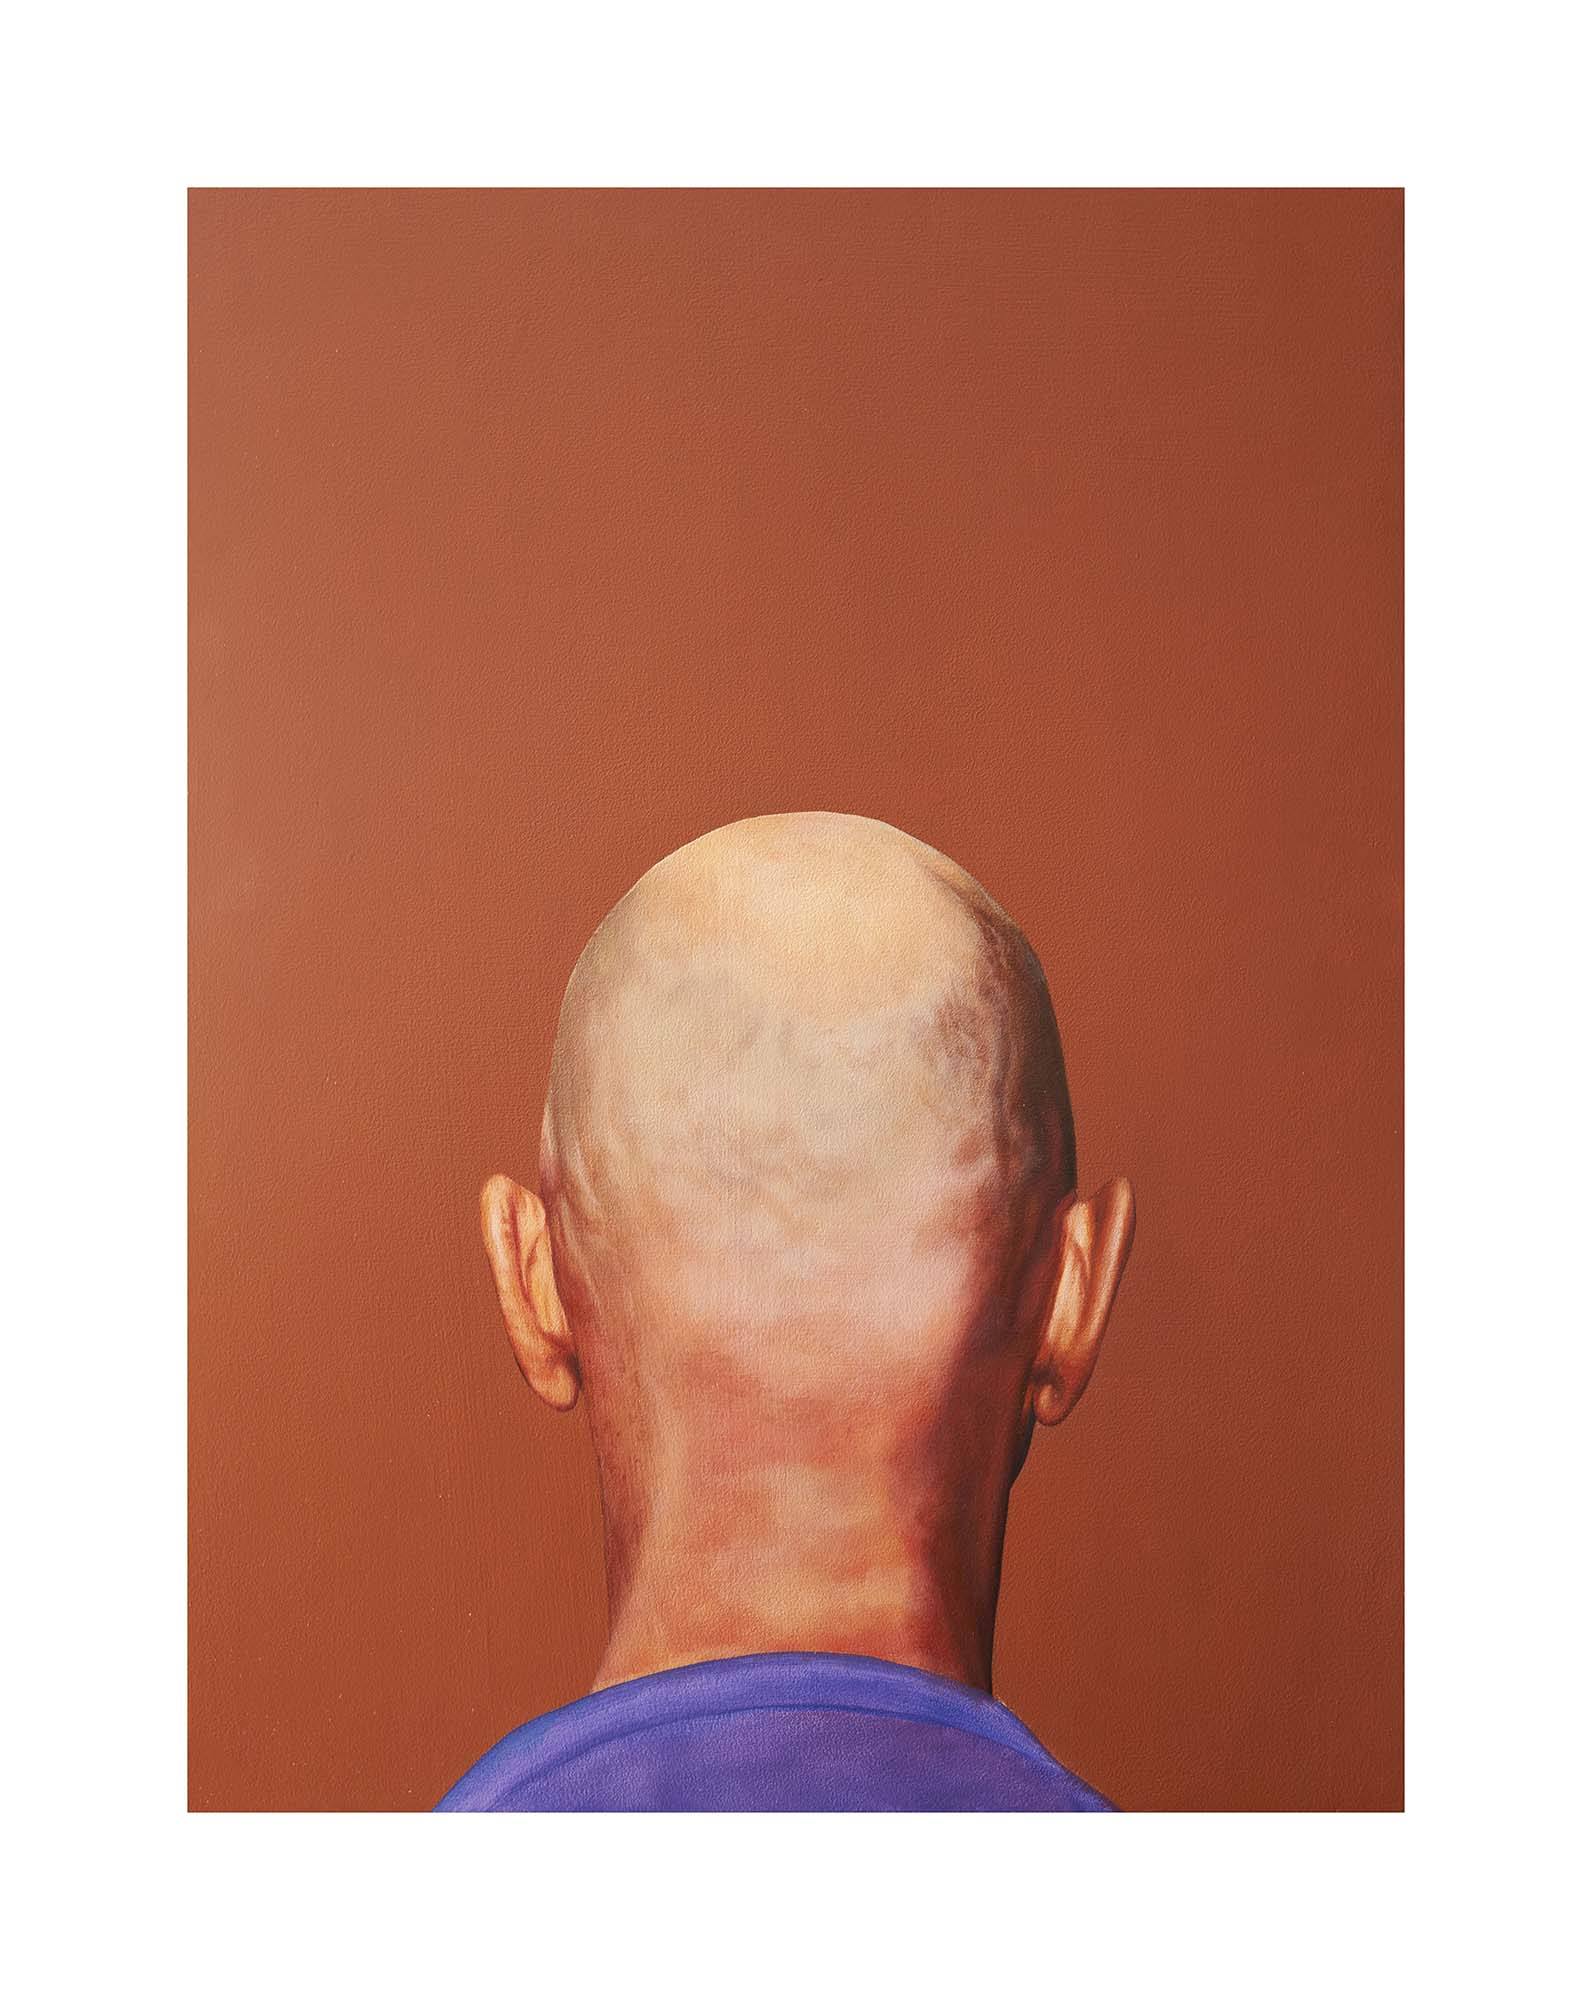 A painting of the back of a head. The subject is bald and wearing a purple shirt